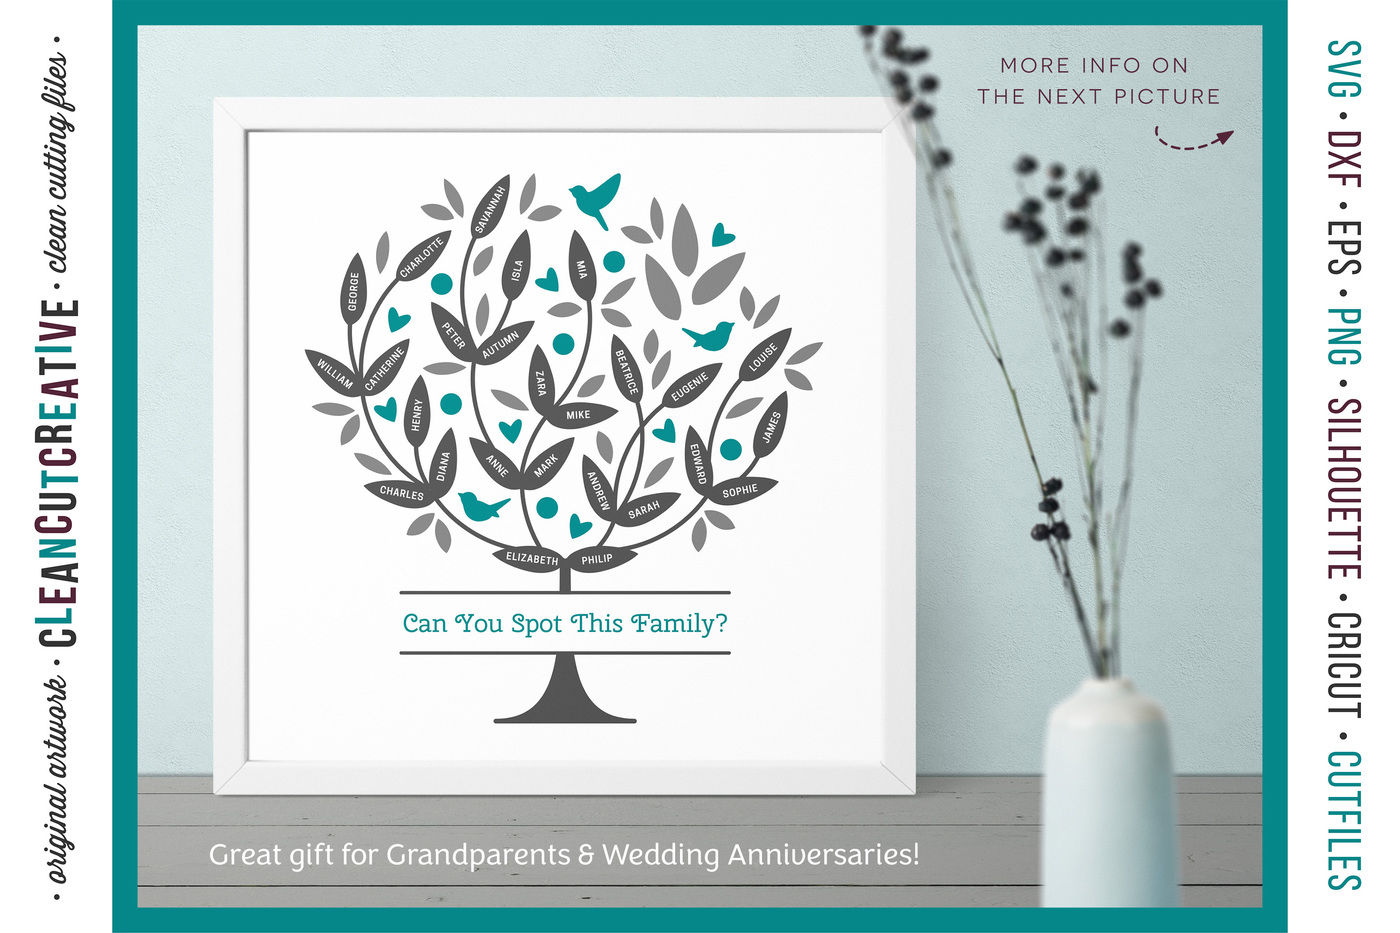 Download Grow A Family Tree Crafty Design Toolkit Svg Dxf Eps Png By Cleancutcreative Thehungryjpeg Com